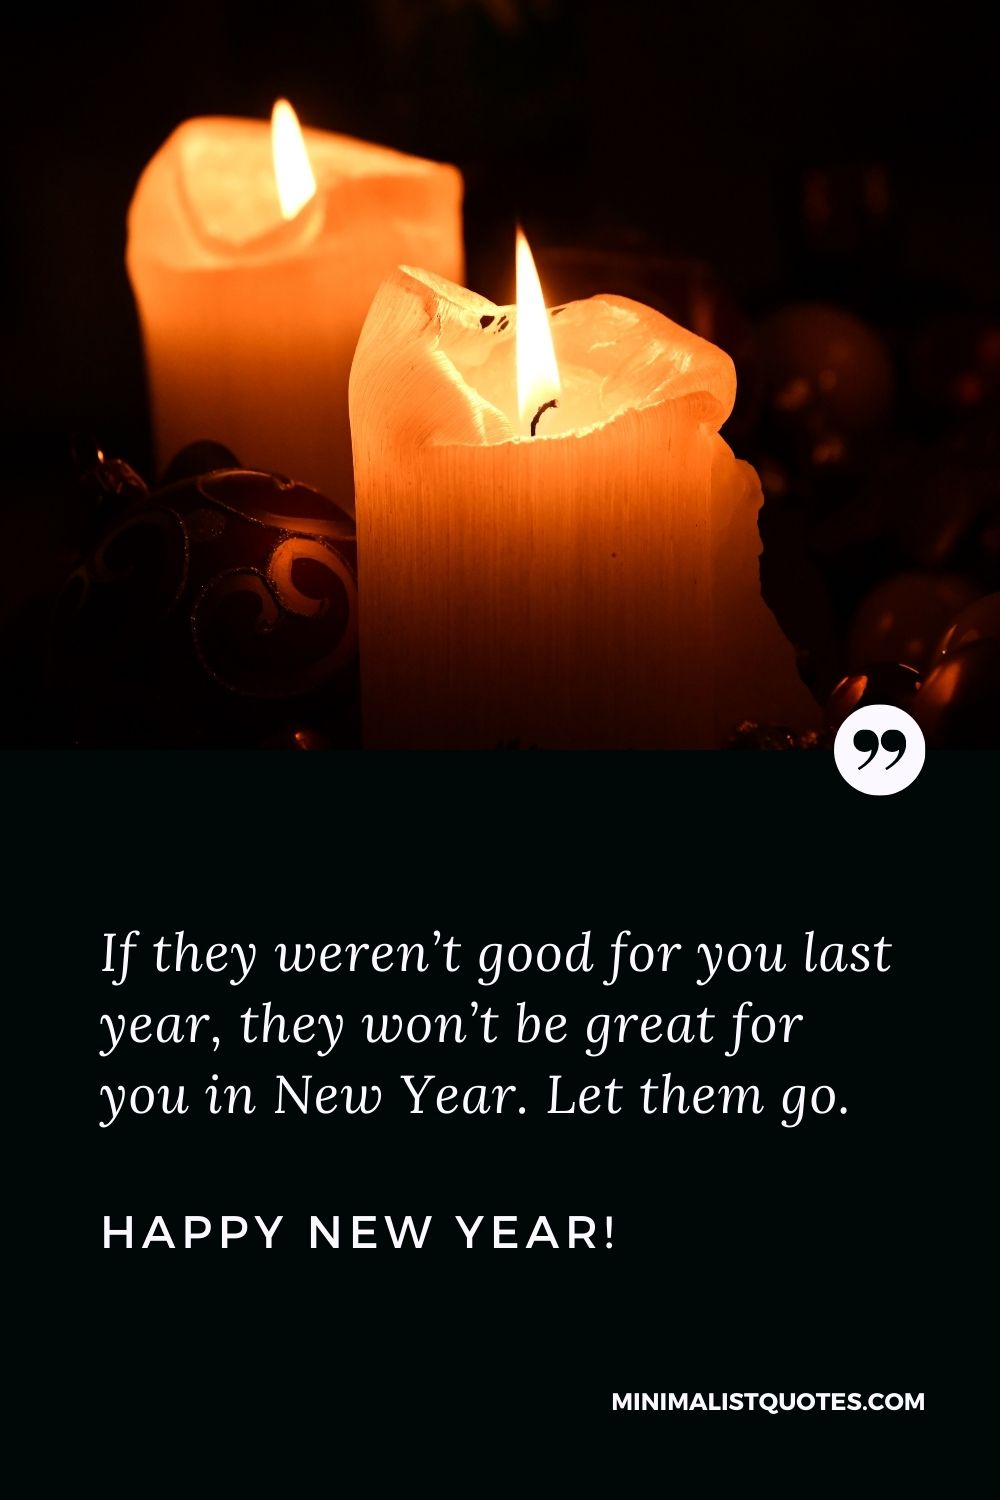 Heartfelt happy new year quotes: If they weren’t good for you last year, they won’t be great for you in New Year. Let them go. Happy New Year!